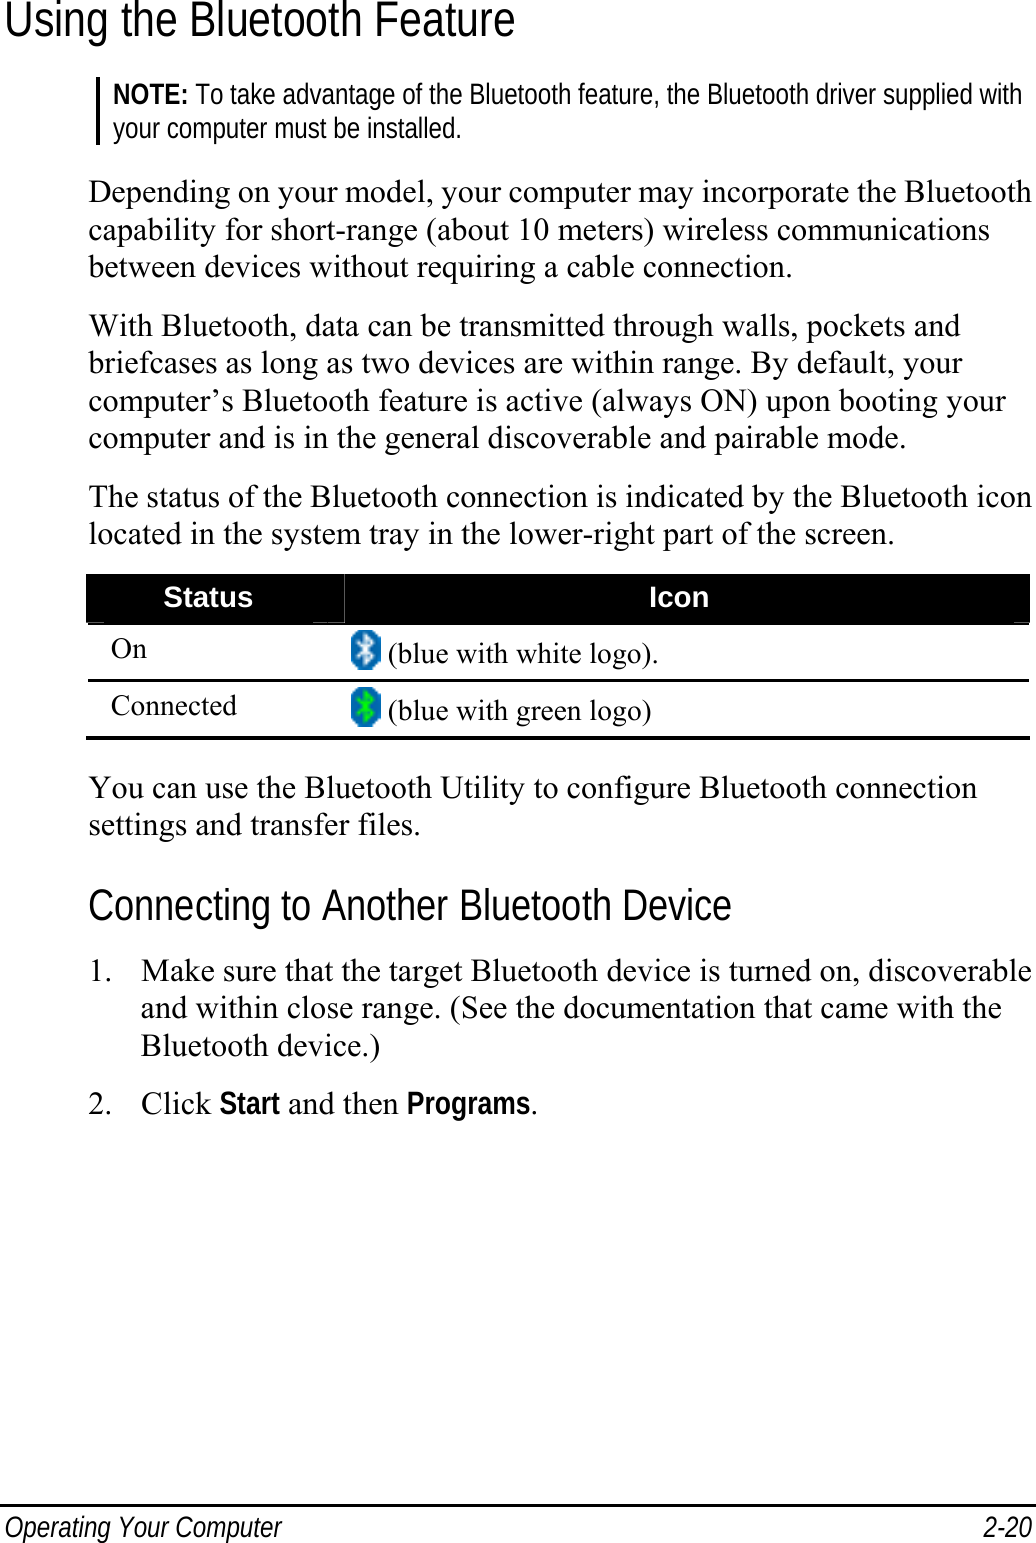  Operating Your Computer  2-20 Using the Bluetooth Feature NOTE: To take advantage of the Bluetooth feature, the Bluetooth driver supplied with your computer must be installed.  Depending on your model, your computer may incorporate the Bluetooth capability for short-range (about 10 meters) wireless communications between devices without requiring a cable connection. With Bluetooth, data can be transmitted through walls, pockets and briefcases as long as two devices are within range. By default, your computer’s Bluetooth feature is active (always ON) upon booting your computer and is in the general discoverable and pairable mode. The status of the Bluetooth connection is indicated by the Bluetooth icon located in the system tray in the lower-right part of the screen. Status  Icon On   (blue with white logo). Connected   (blue with green logo)  You can use the Bluetooth Utility to configure Bluetooth connection settings and transfer files. Connecting to Another Bluetooth Device 1. Make sure that the target Bluetooth device is turned on, discoverable and within close range. (See the documentation that came with the Bluetooth device.) 2. Click Start and then Programs. 